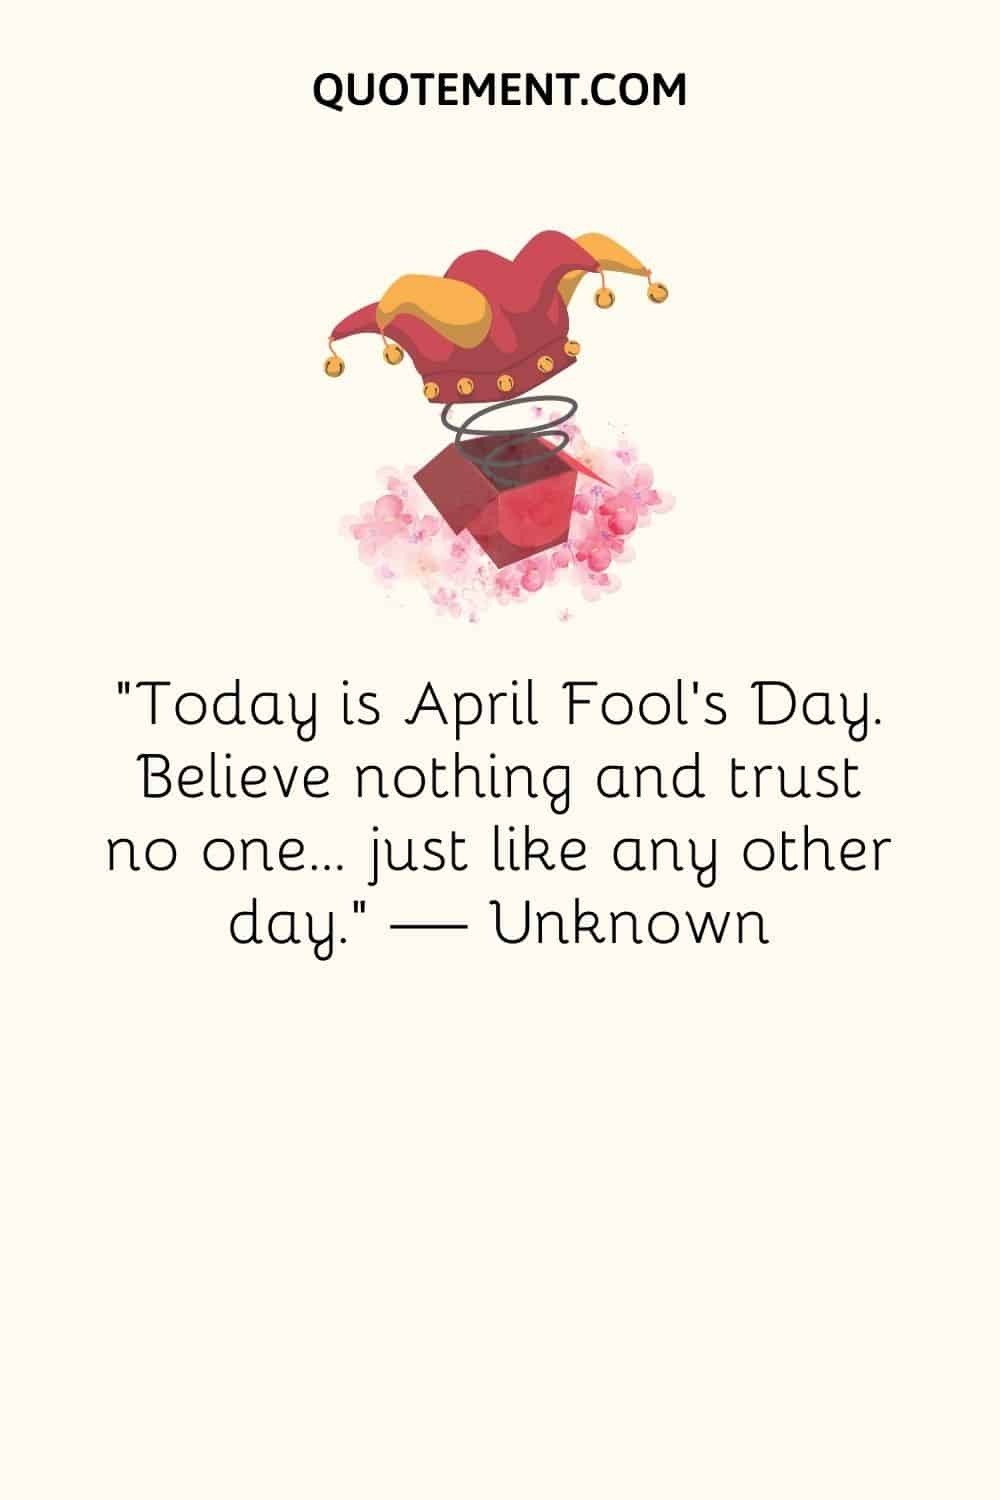 Today is April Fool’s Day. Believe nothing and trust no one… just like any other day